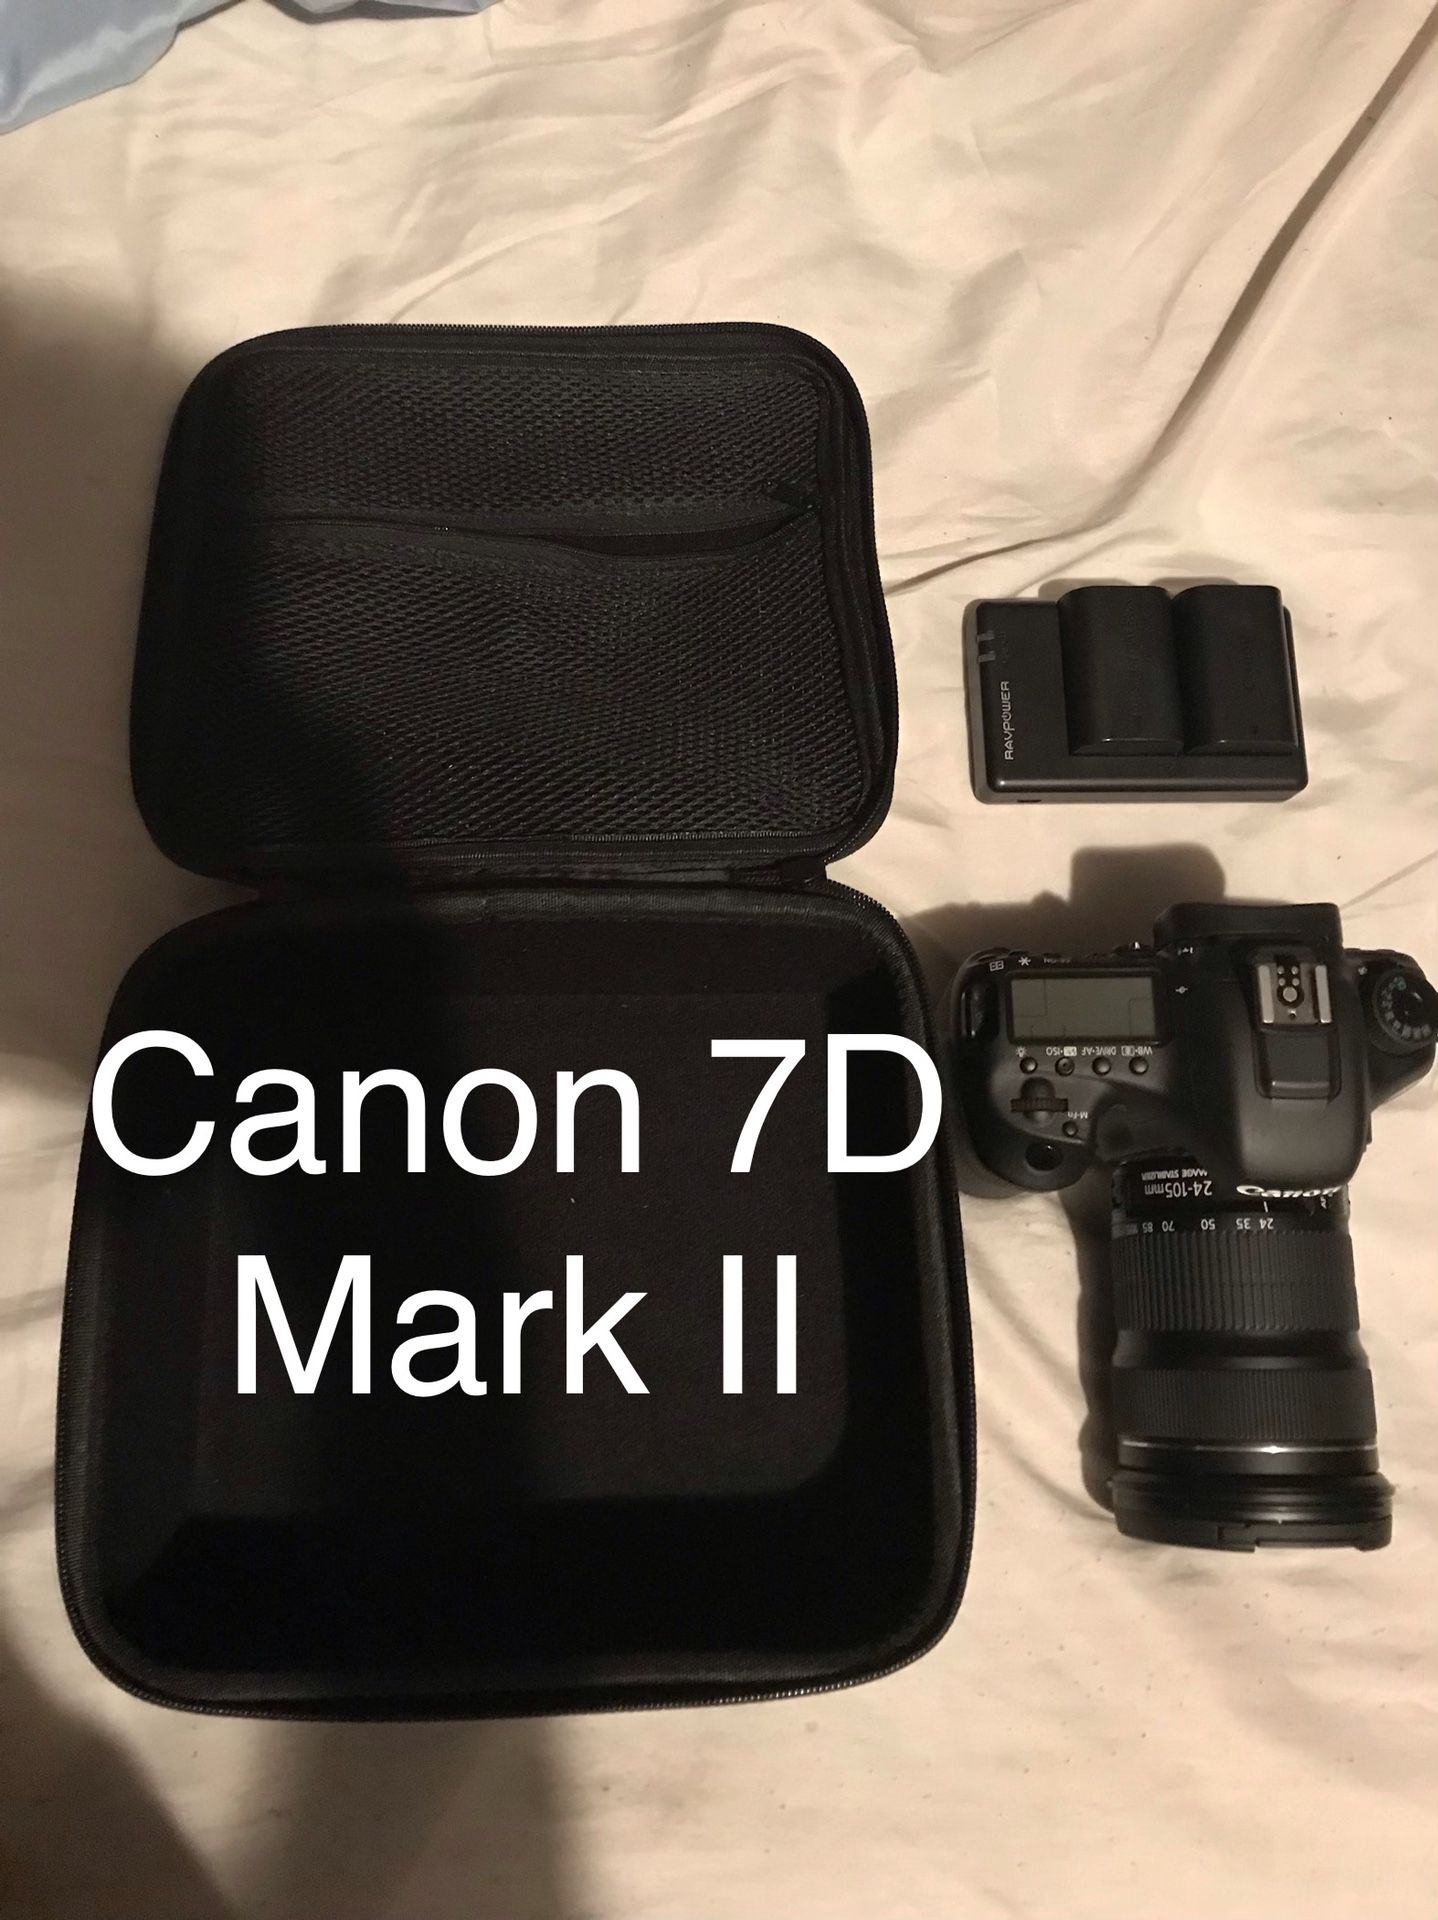 Canon 7d mark 2 “Body only”